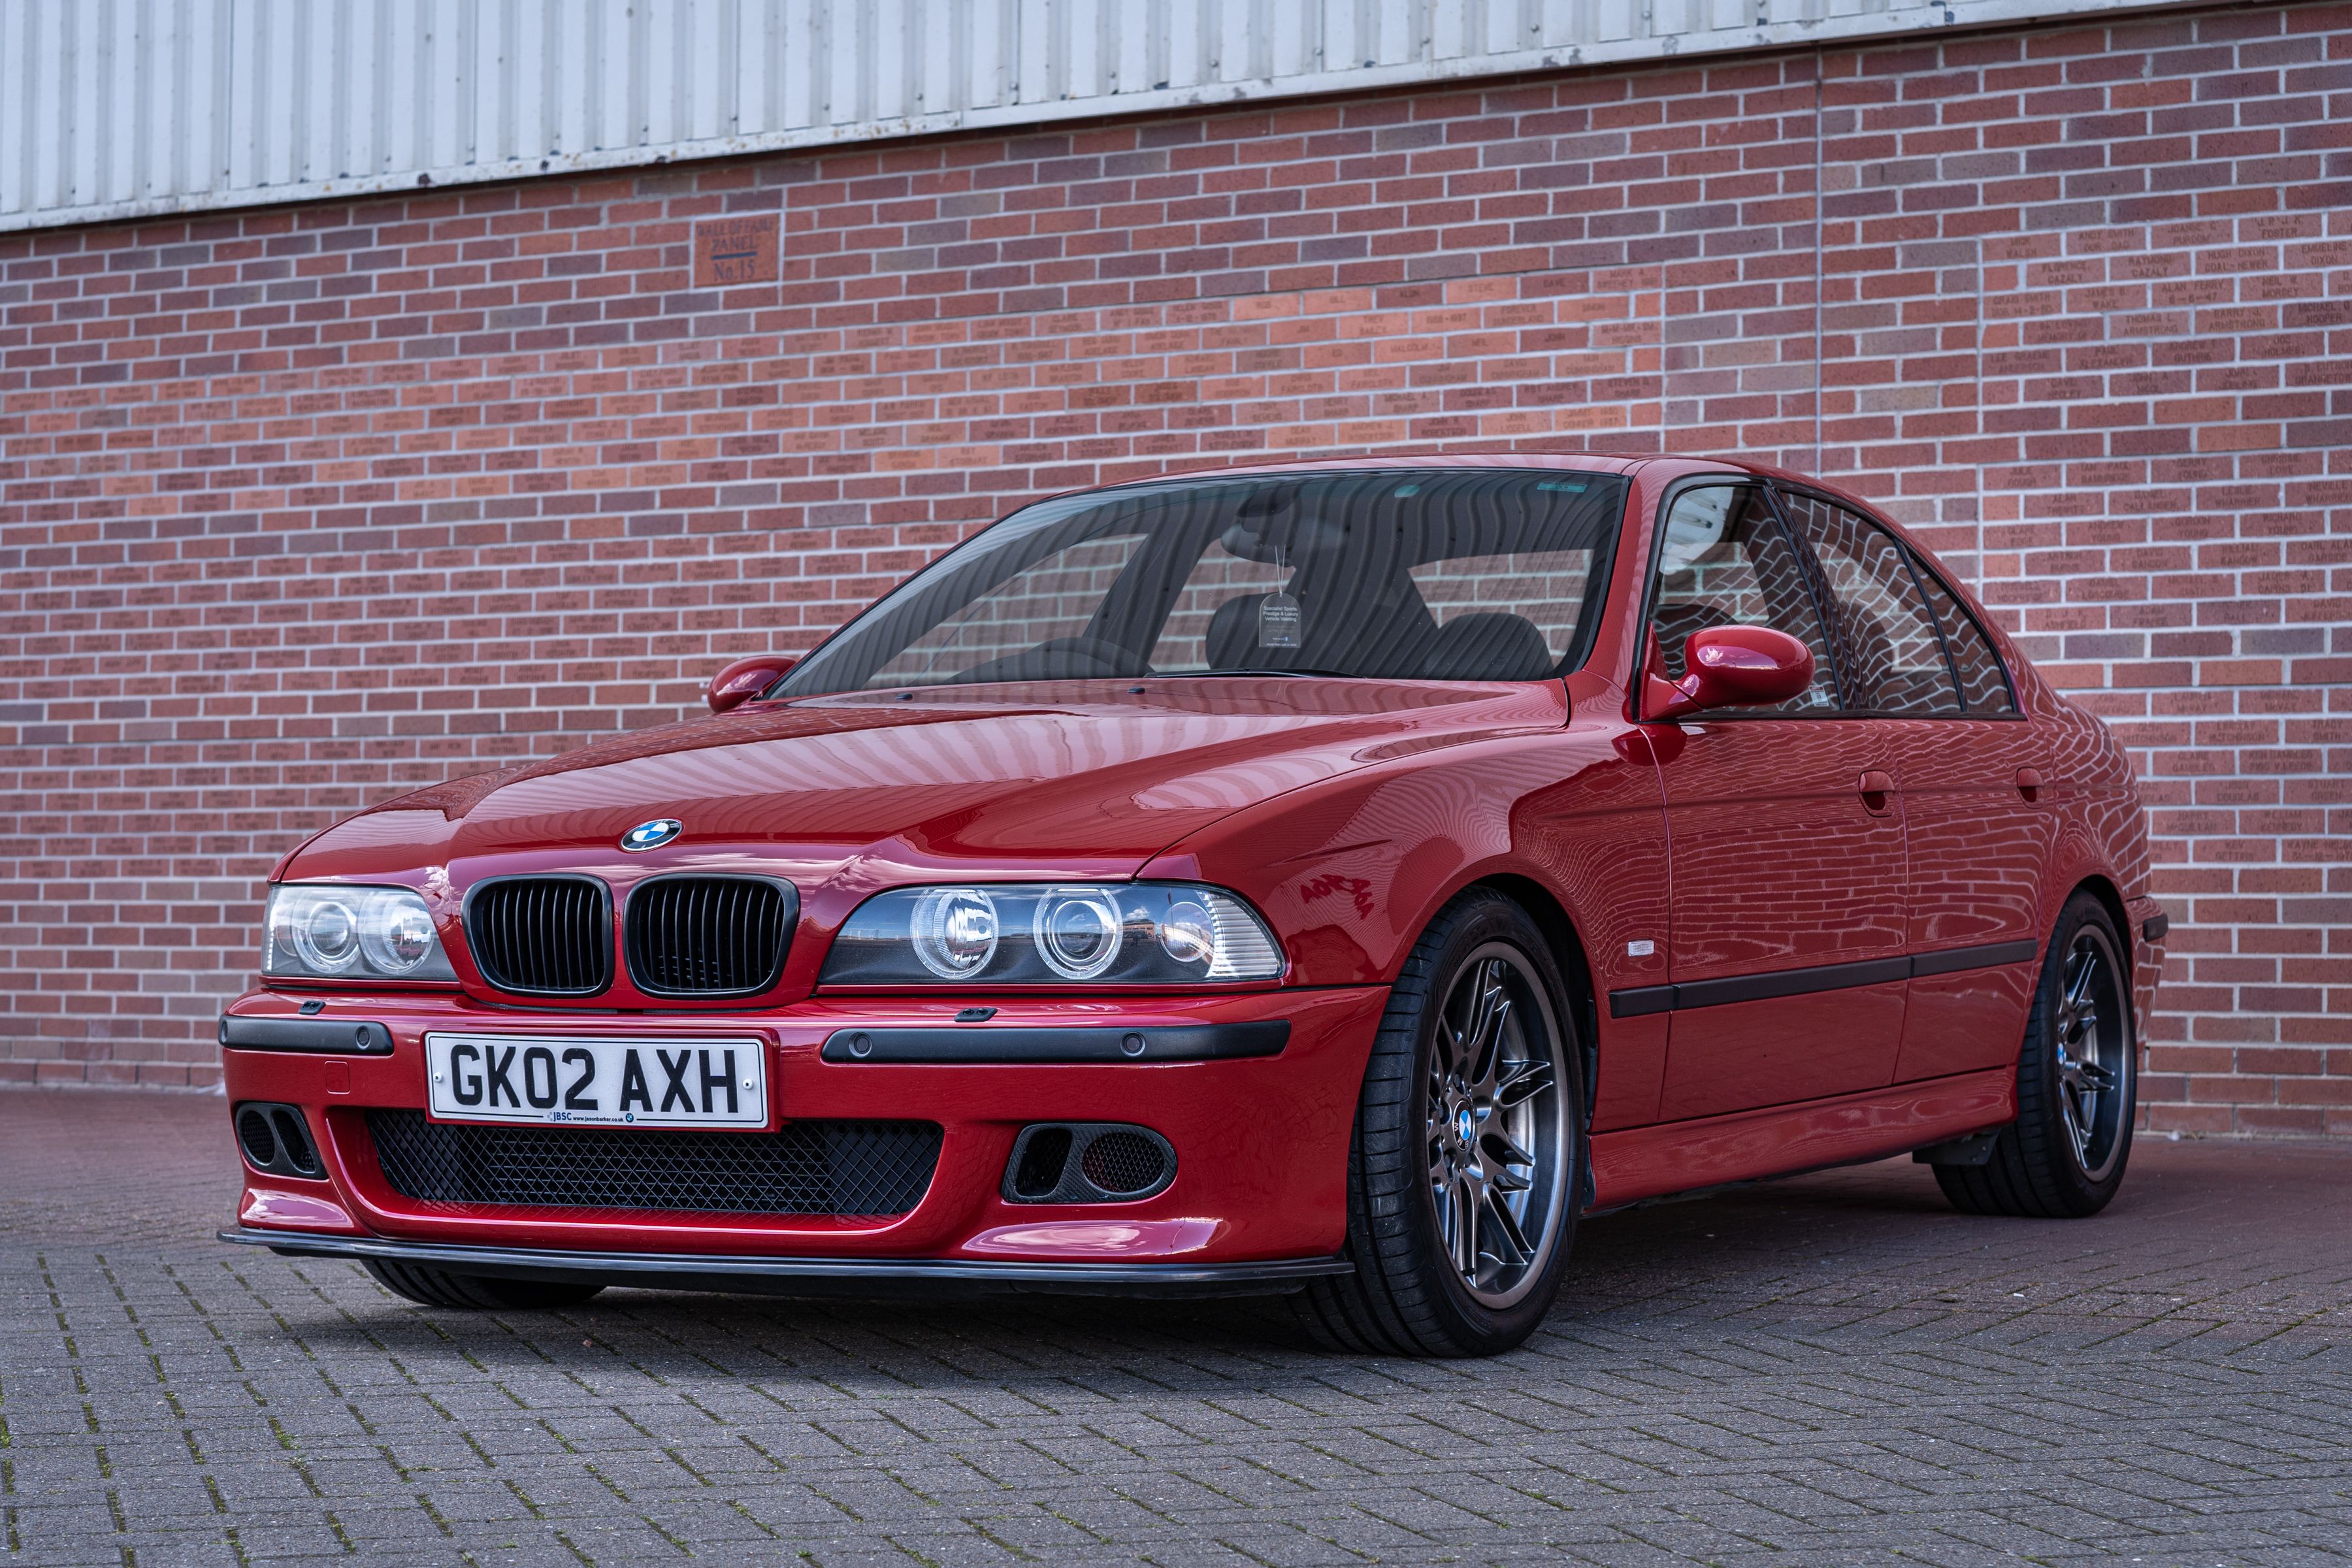 BMW E39 M5 in red